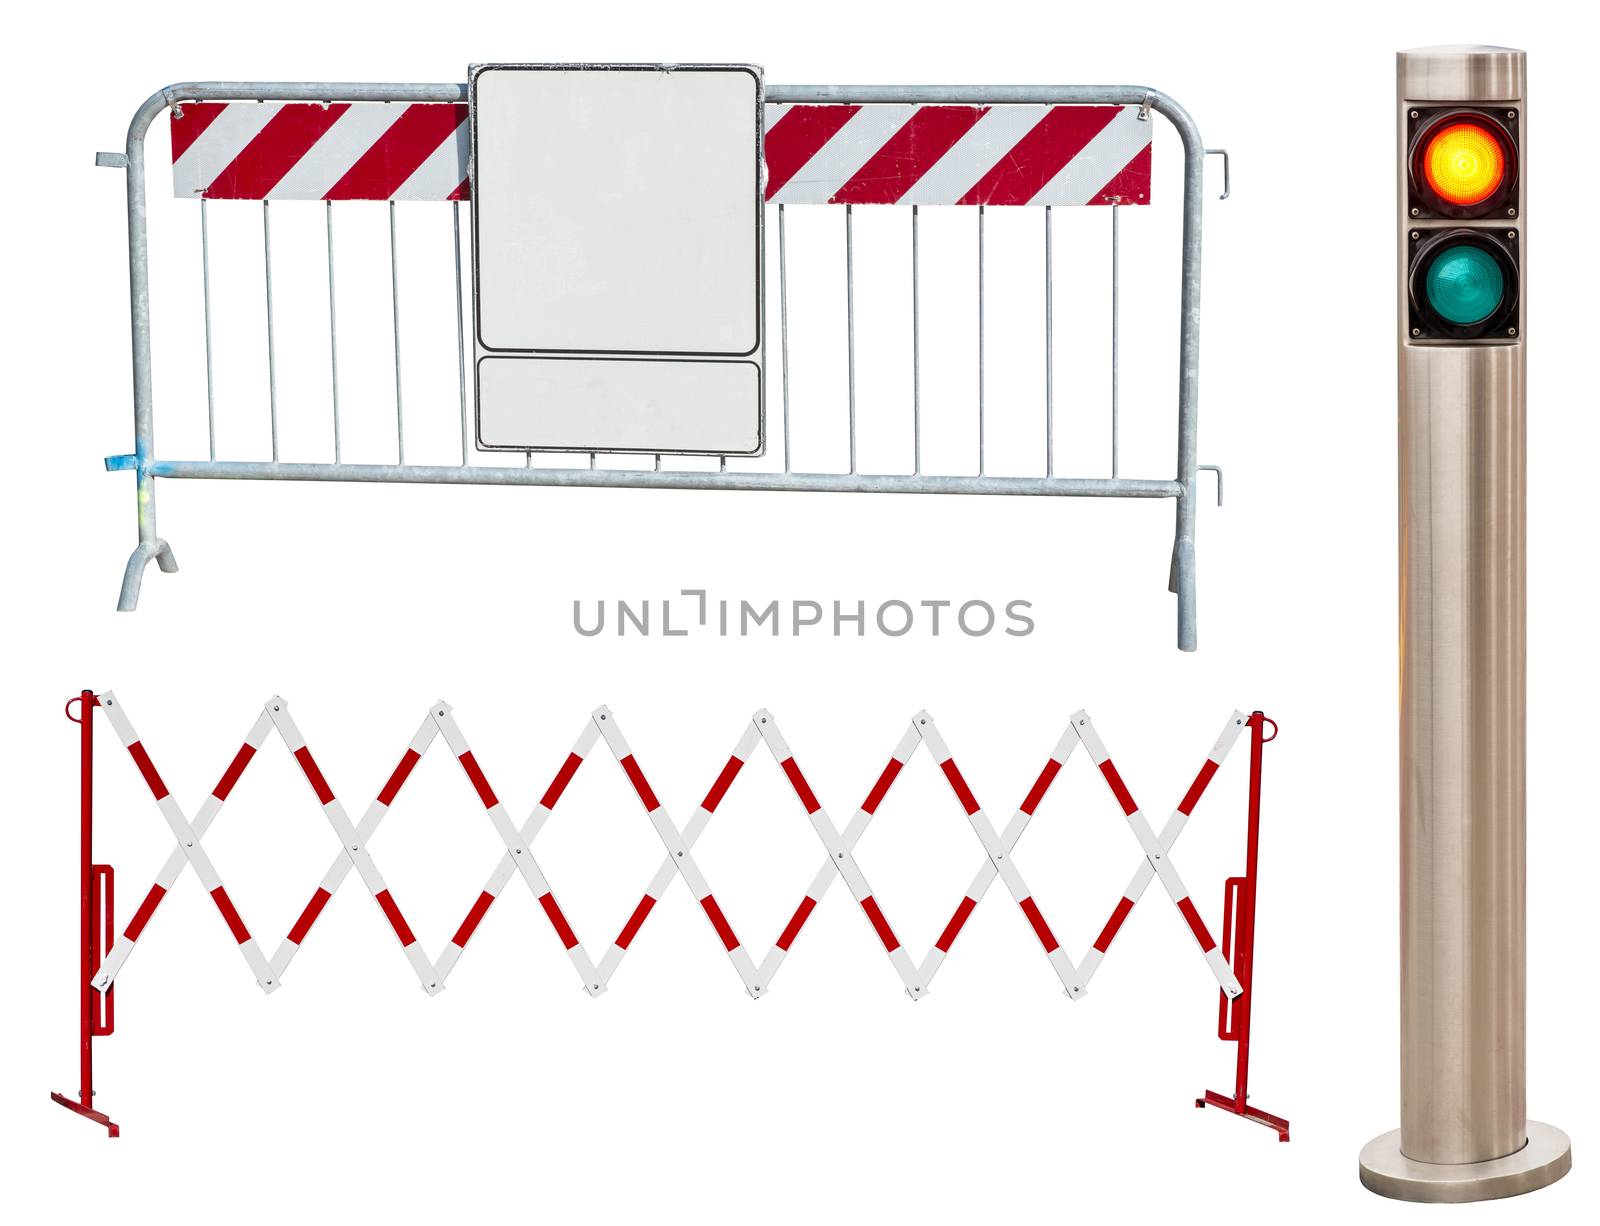 Set of road construction barriers and traffic lights. Isolated on white